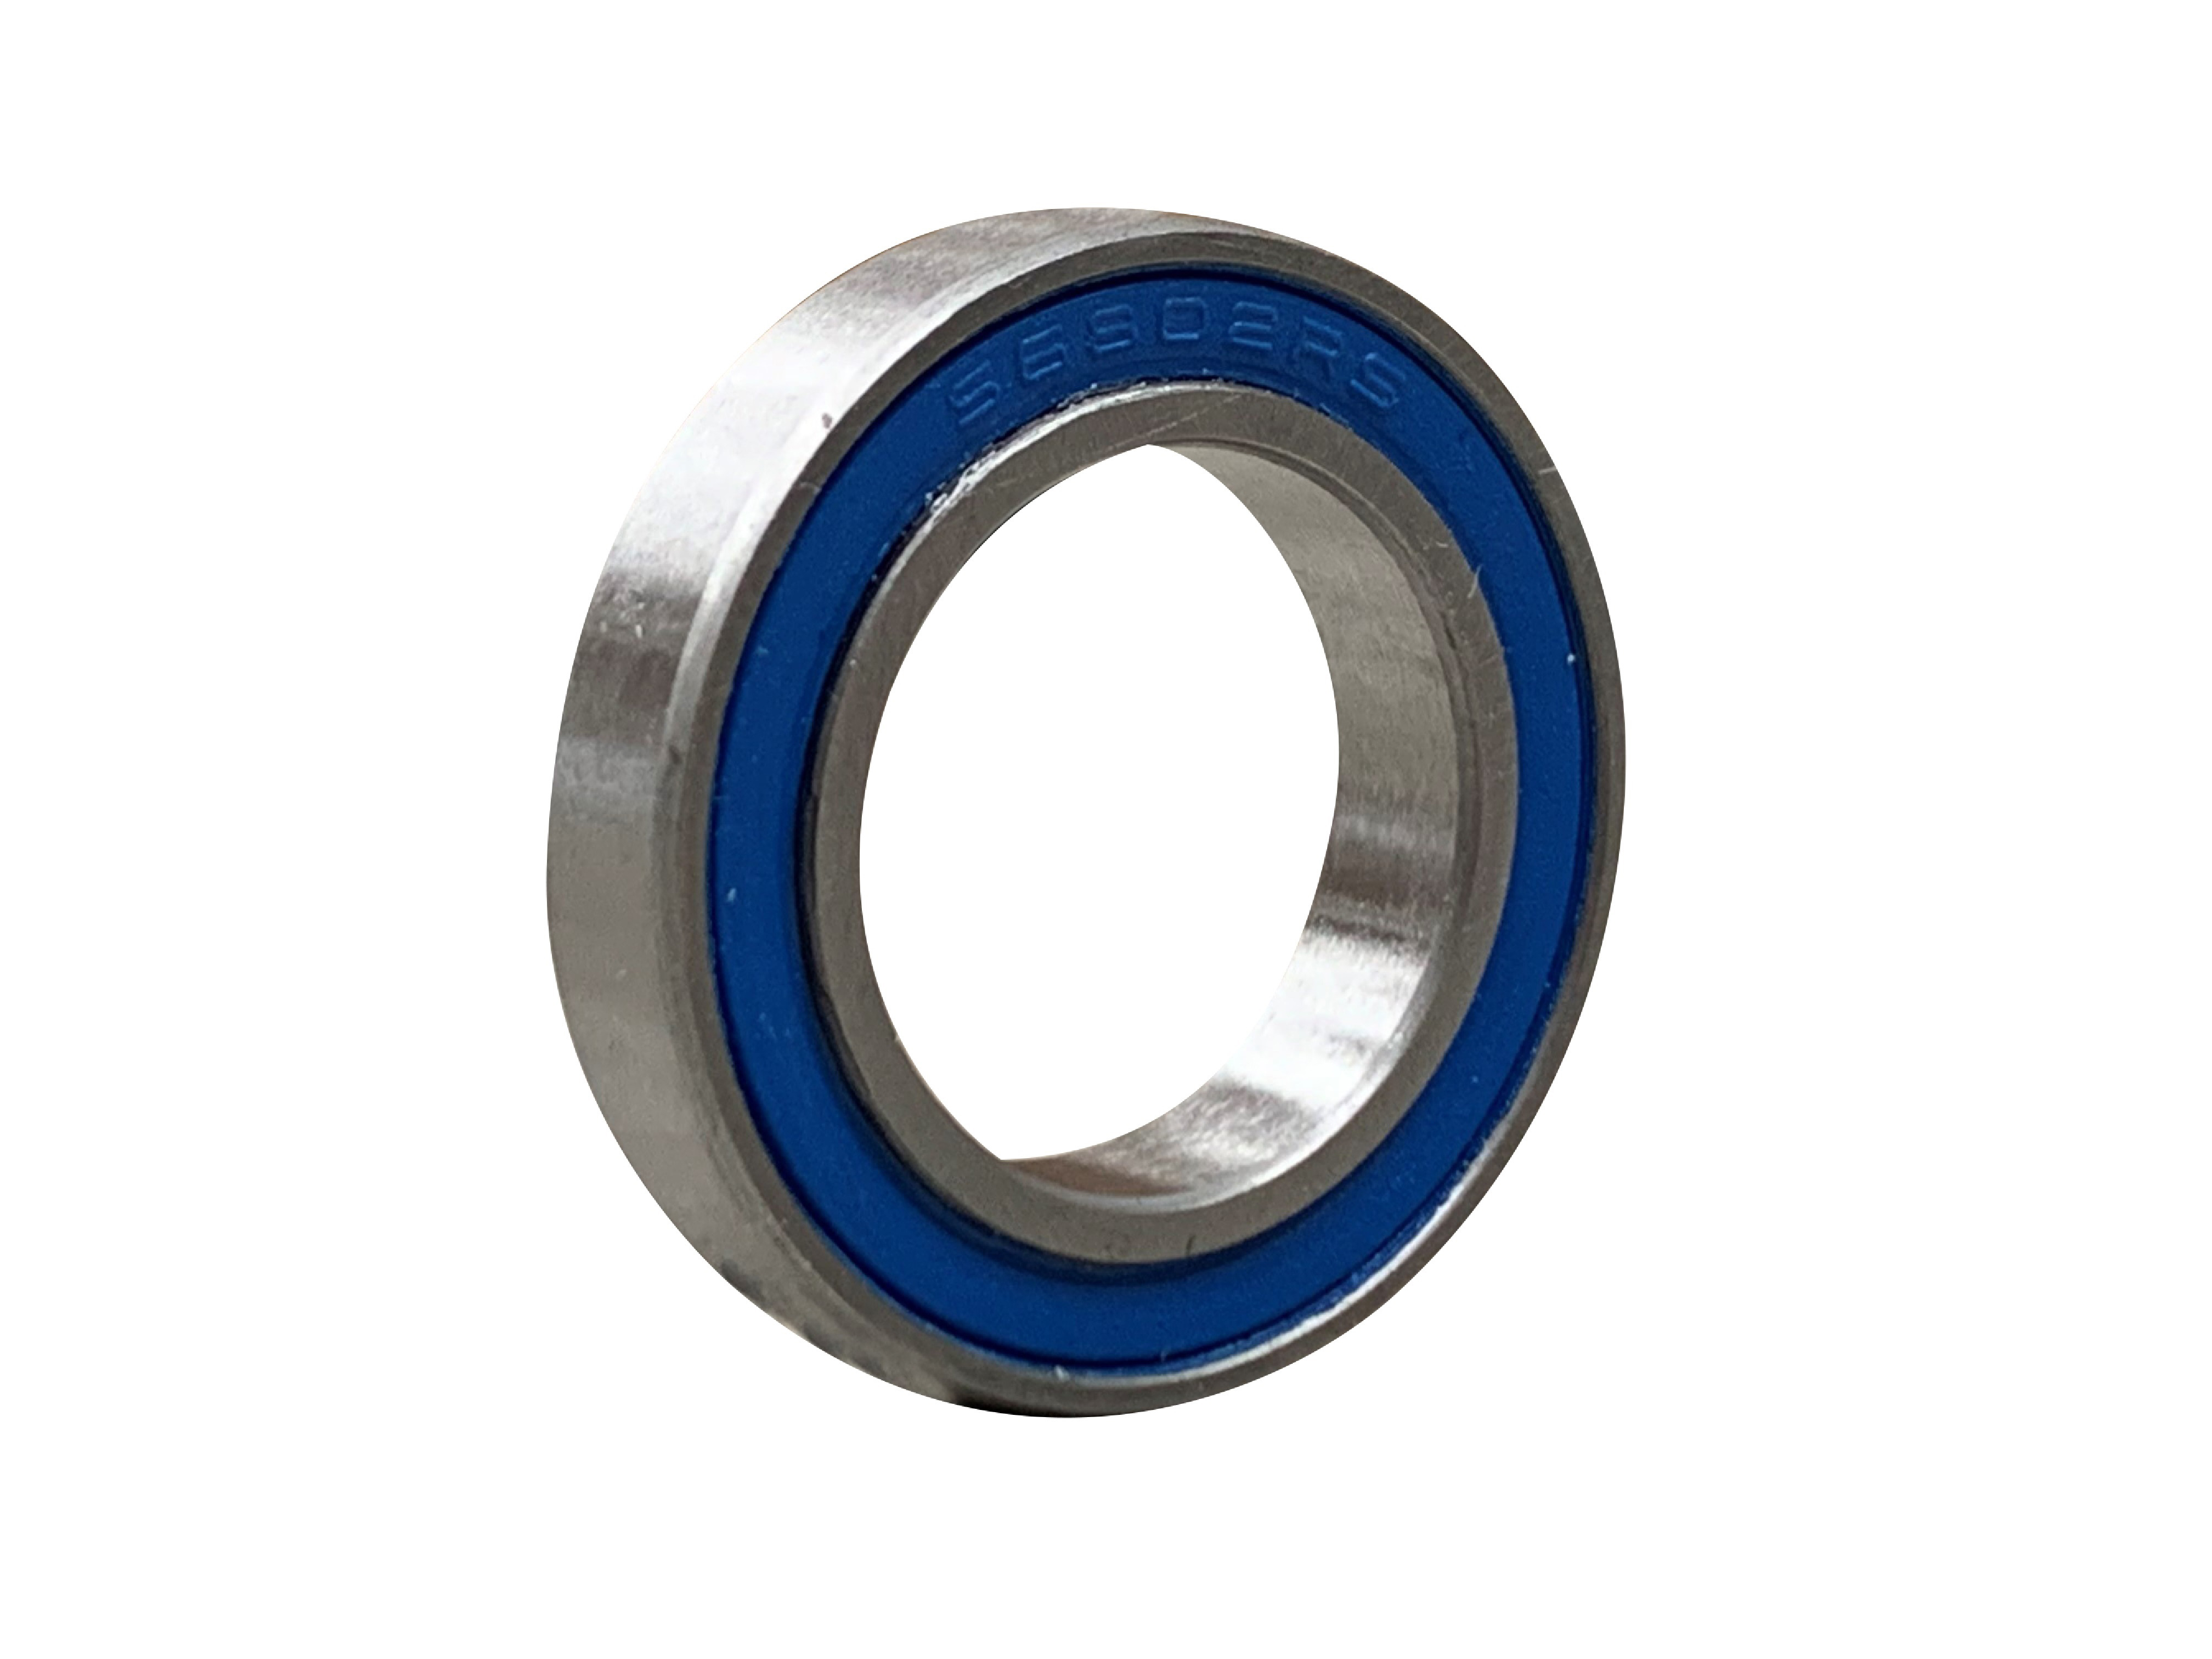 SKF 61816-2RZ Non-Contact Seal Thin Section Ball Bearing 80mm x 100mm x 10mm